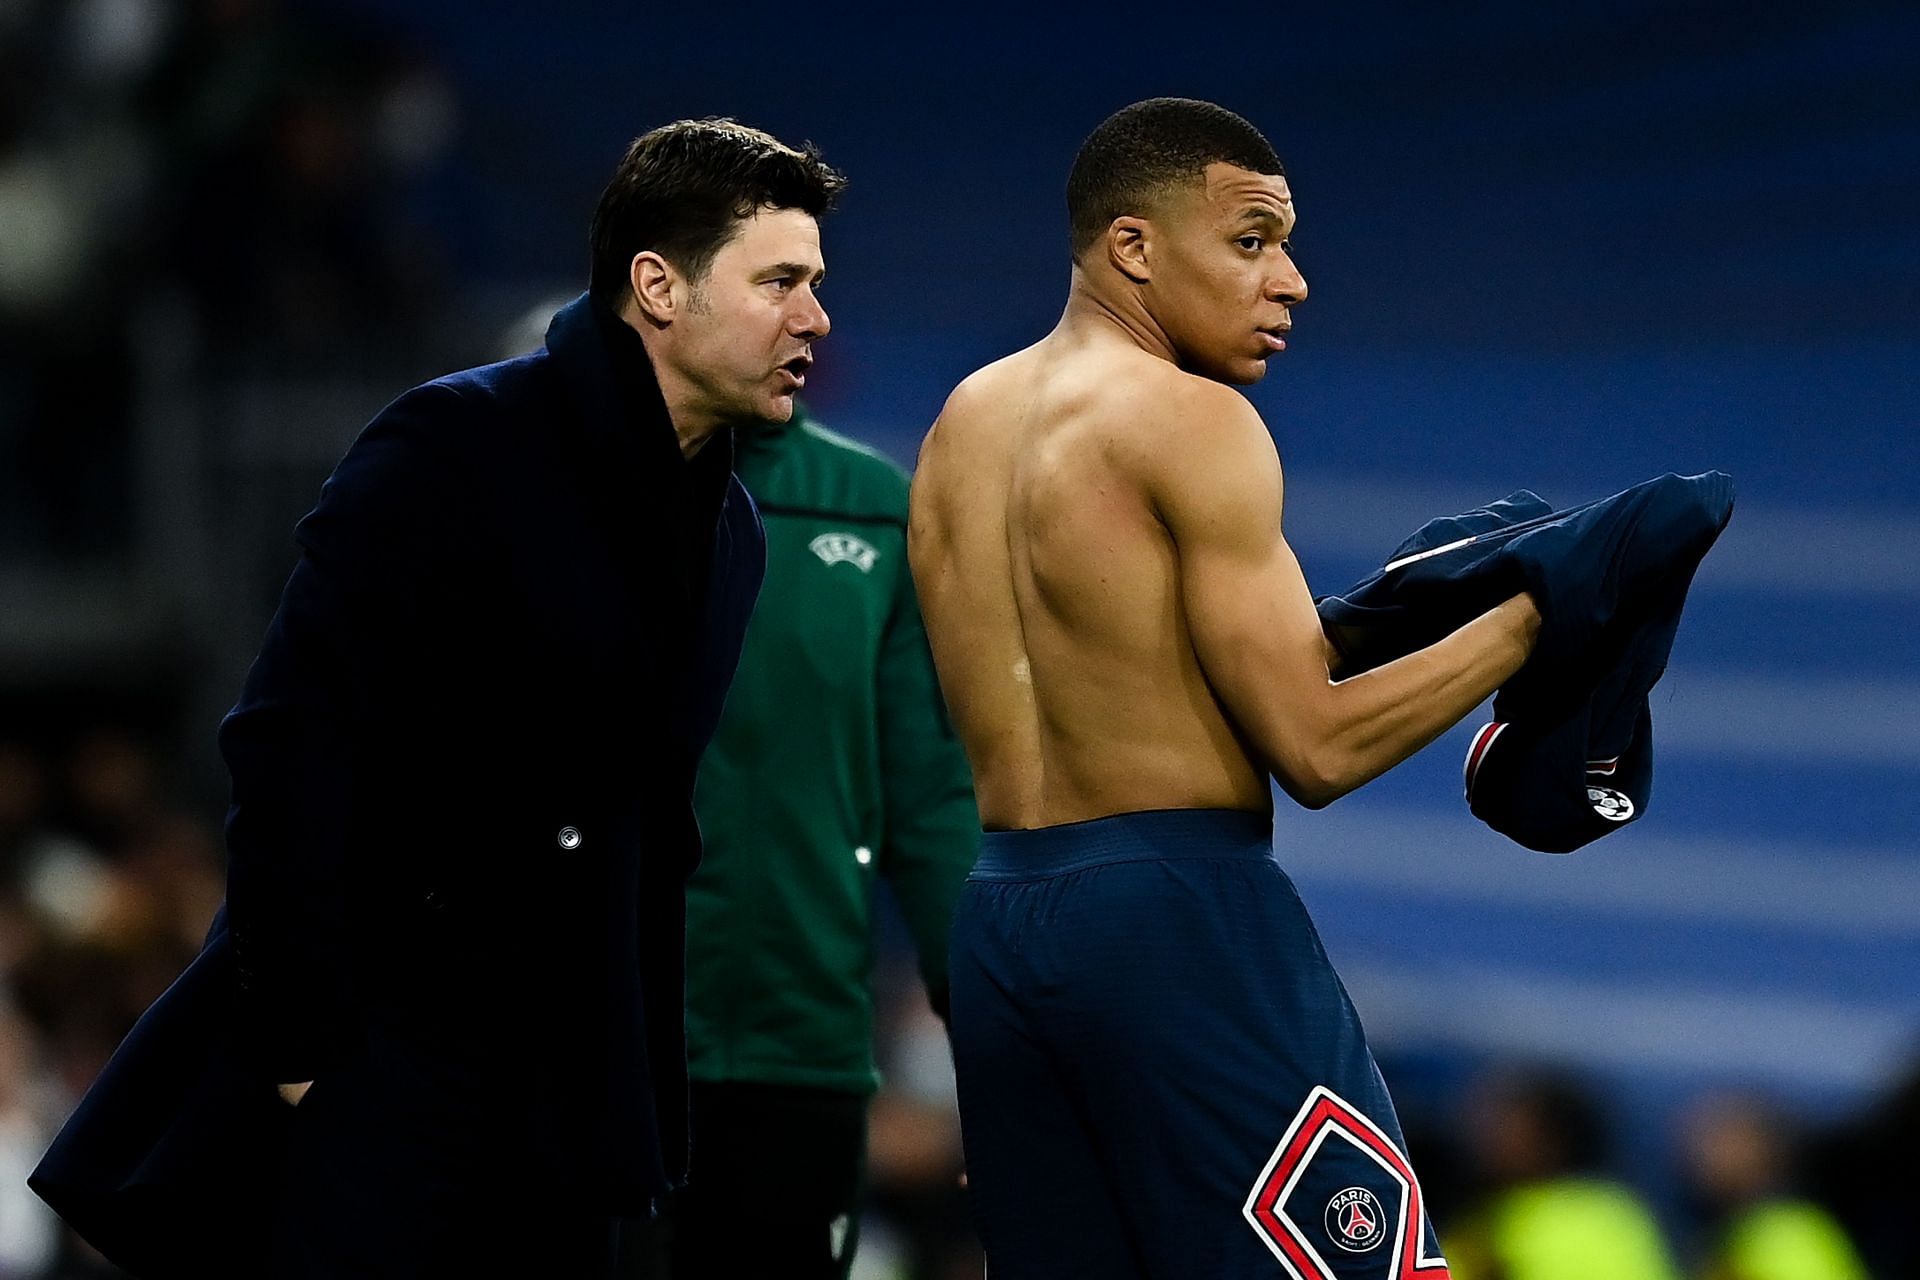 Both Pochettino (left) and Mbappe (right) look close to exiting PSG